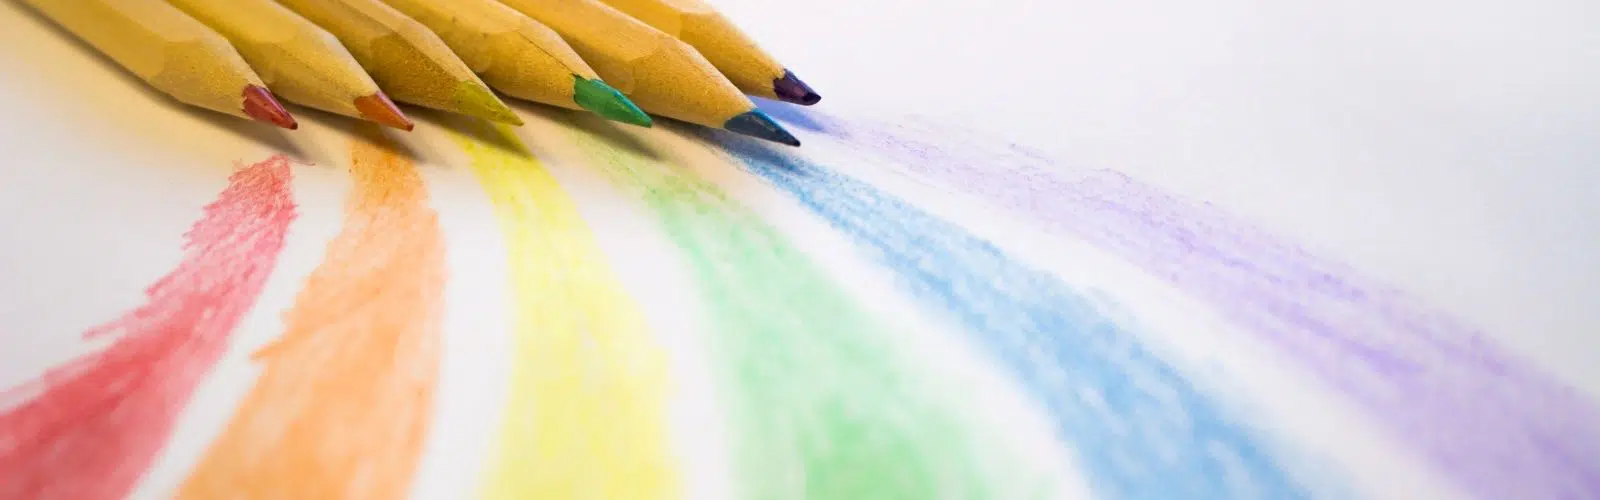 Learning colors: 4 activities to teach primary colors to children